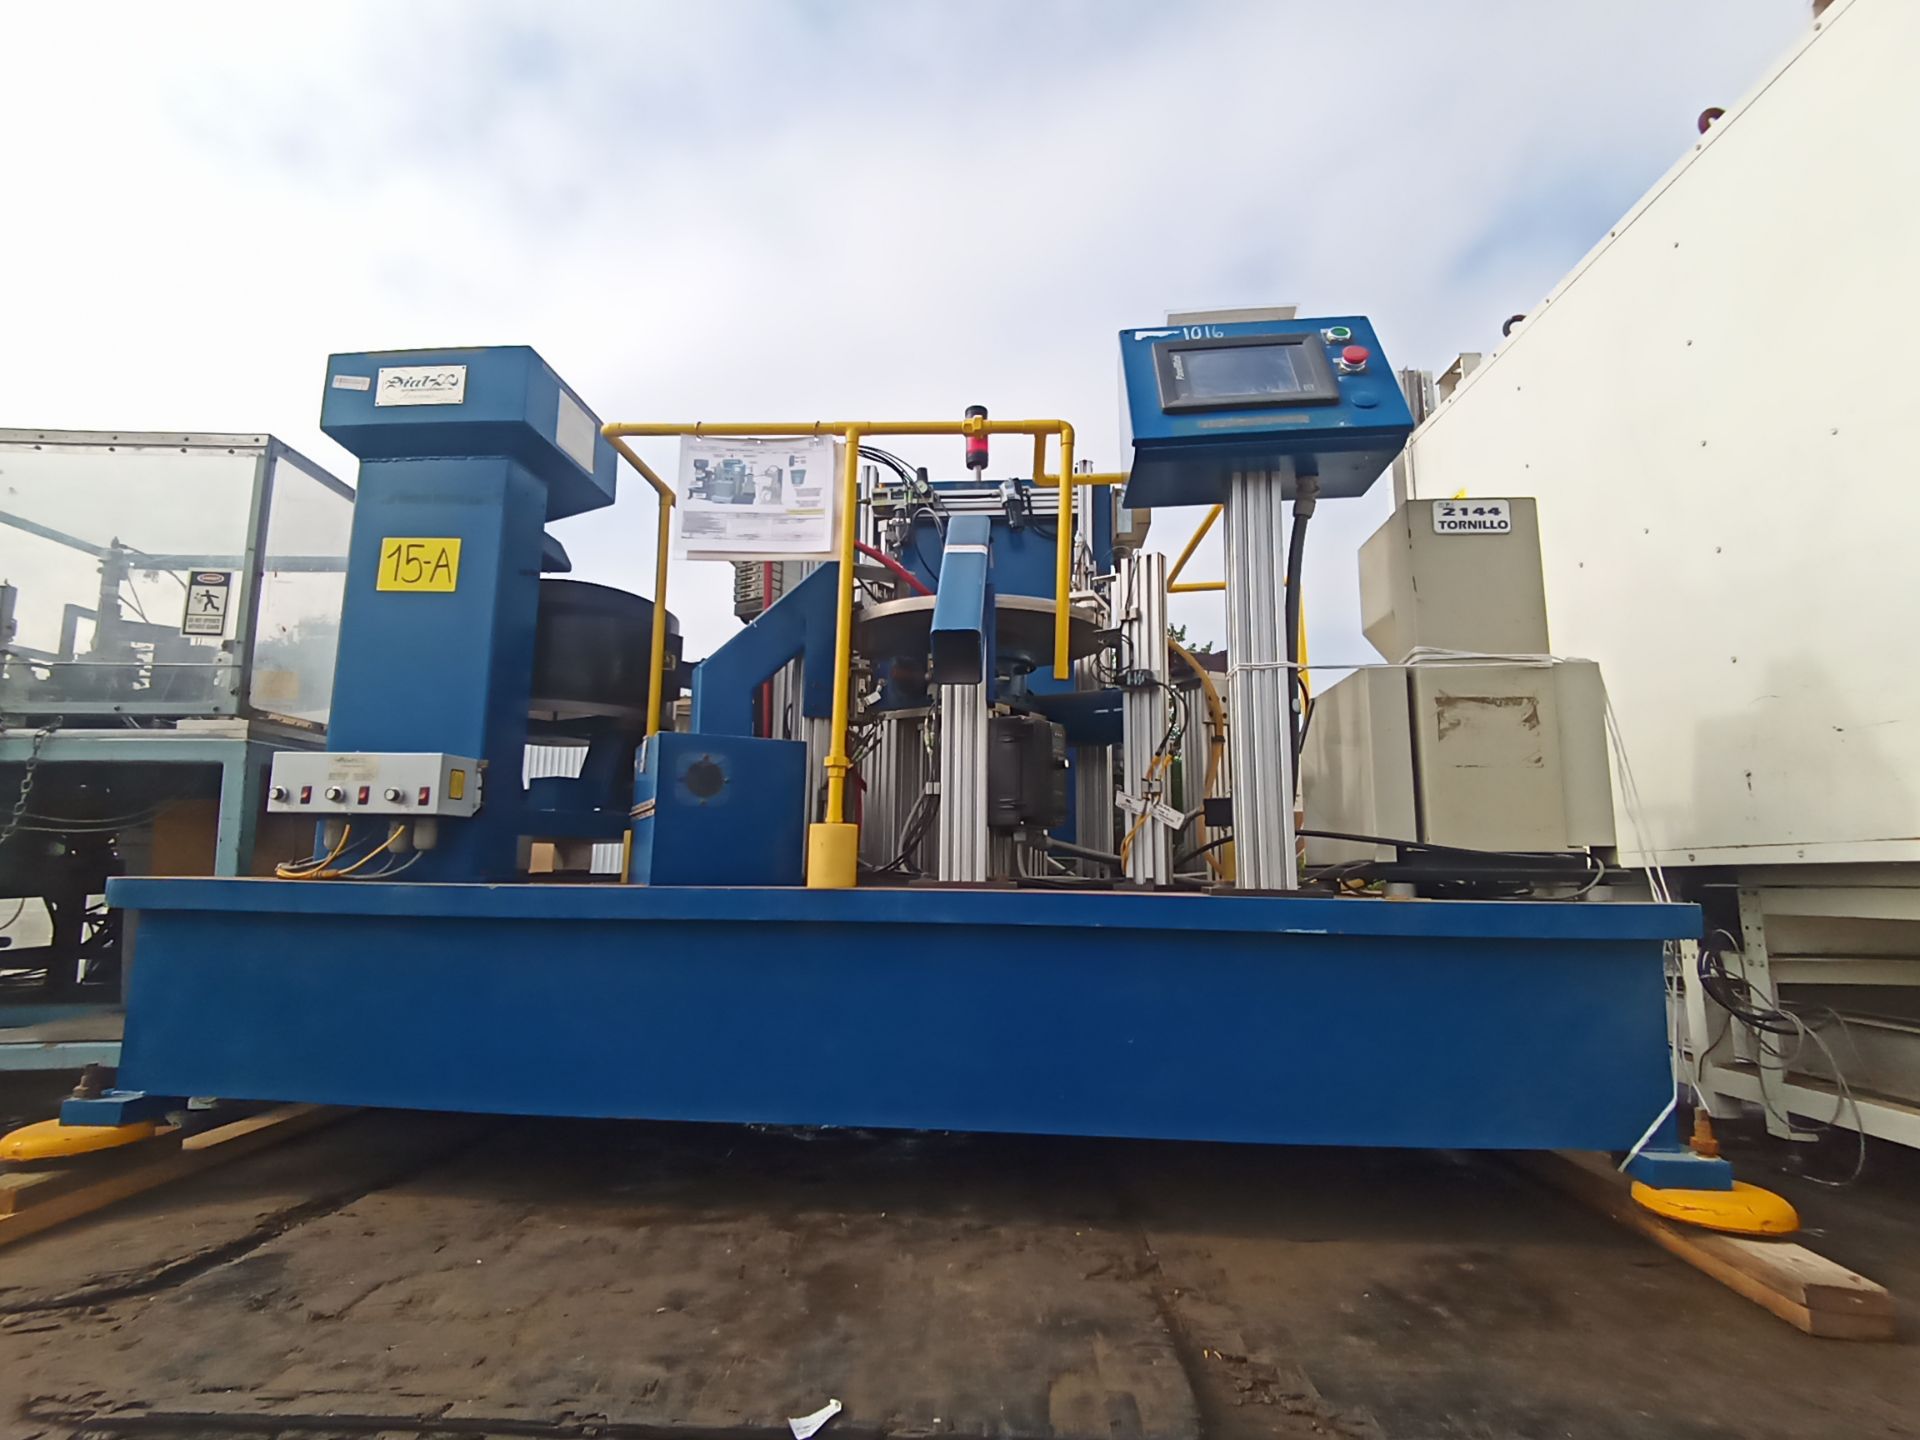 Dial X Vibratory bowl feeders with mounting machine, Model DM.